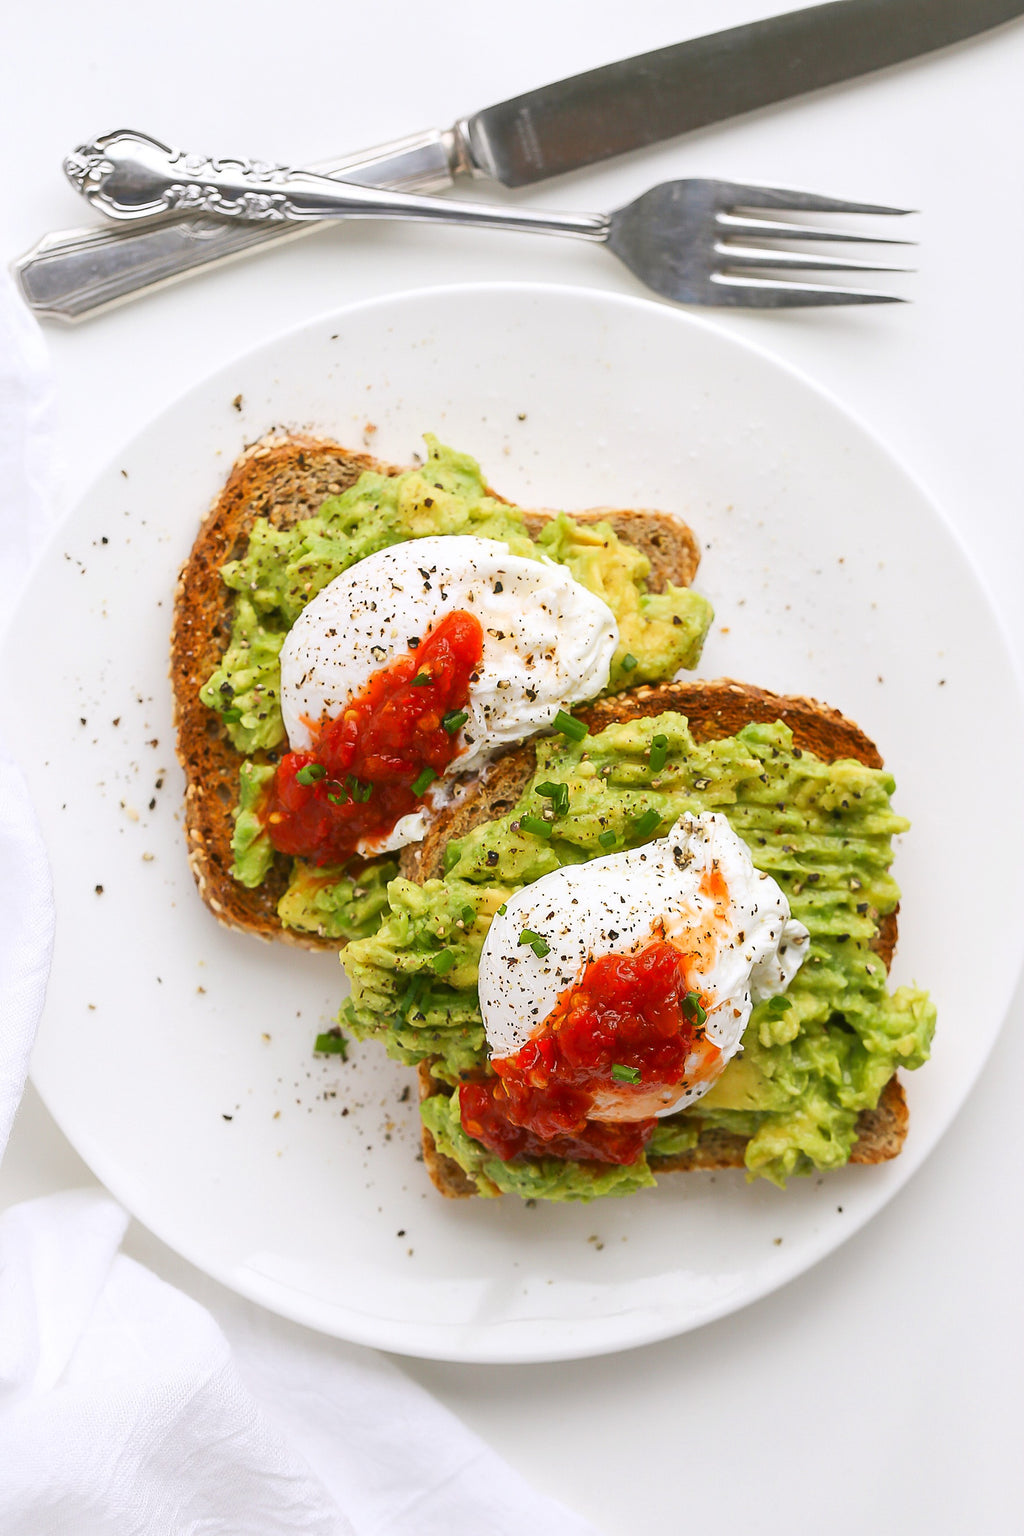 Poached Eggs on Avocado Toast with Super Hot Chili Sambal